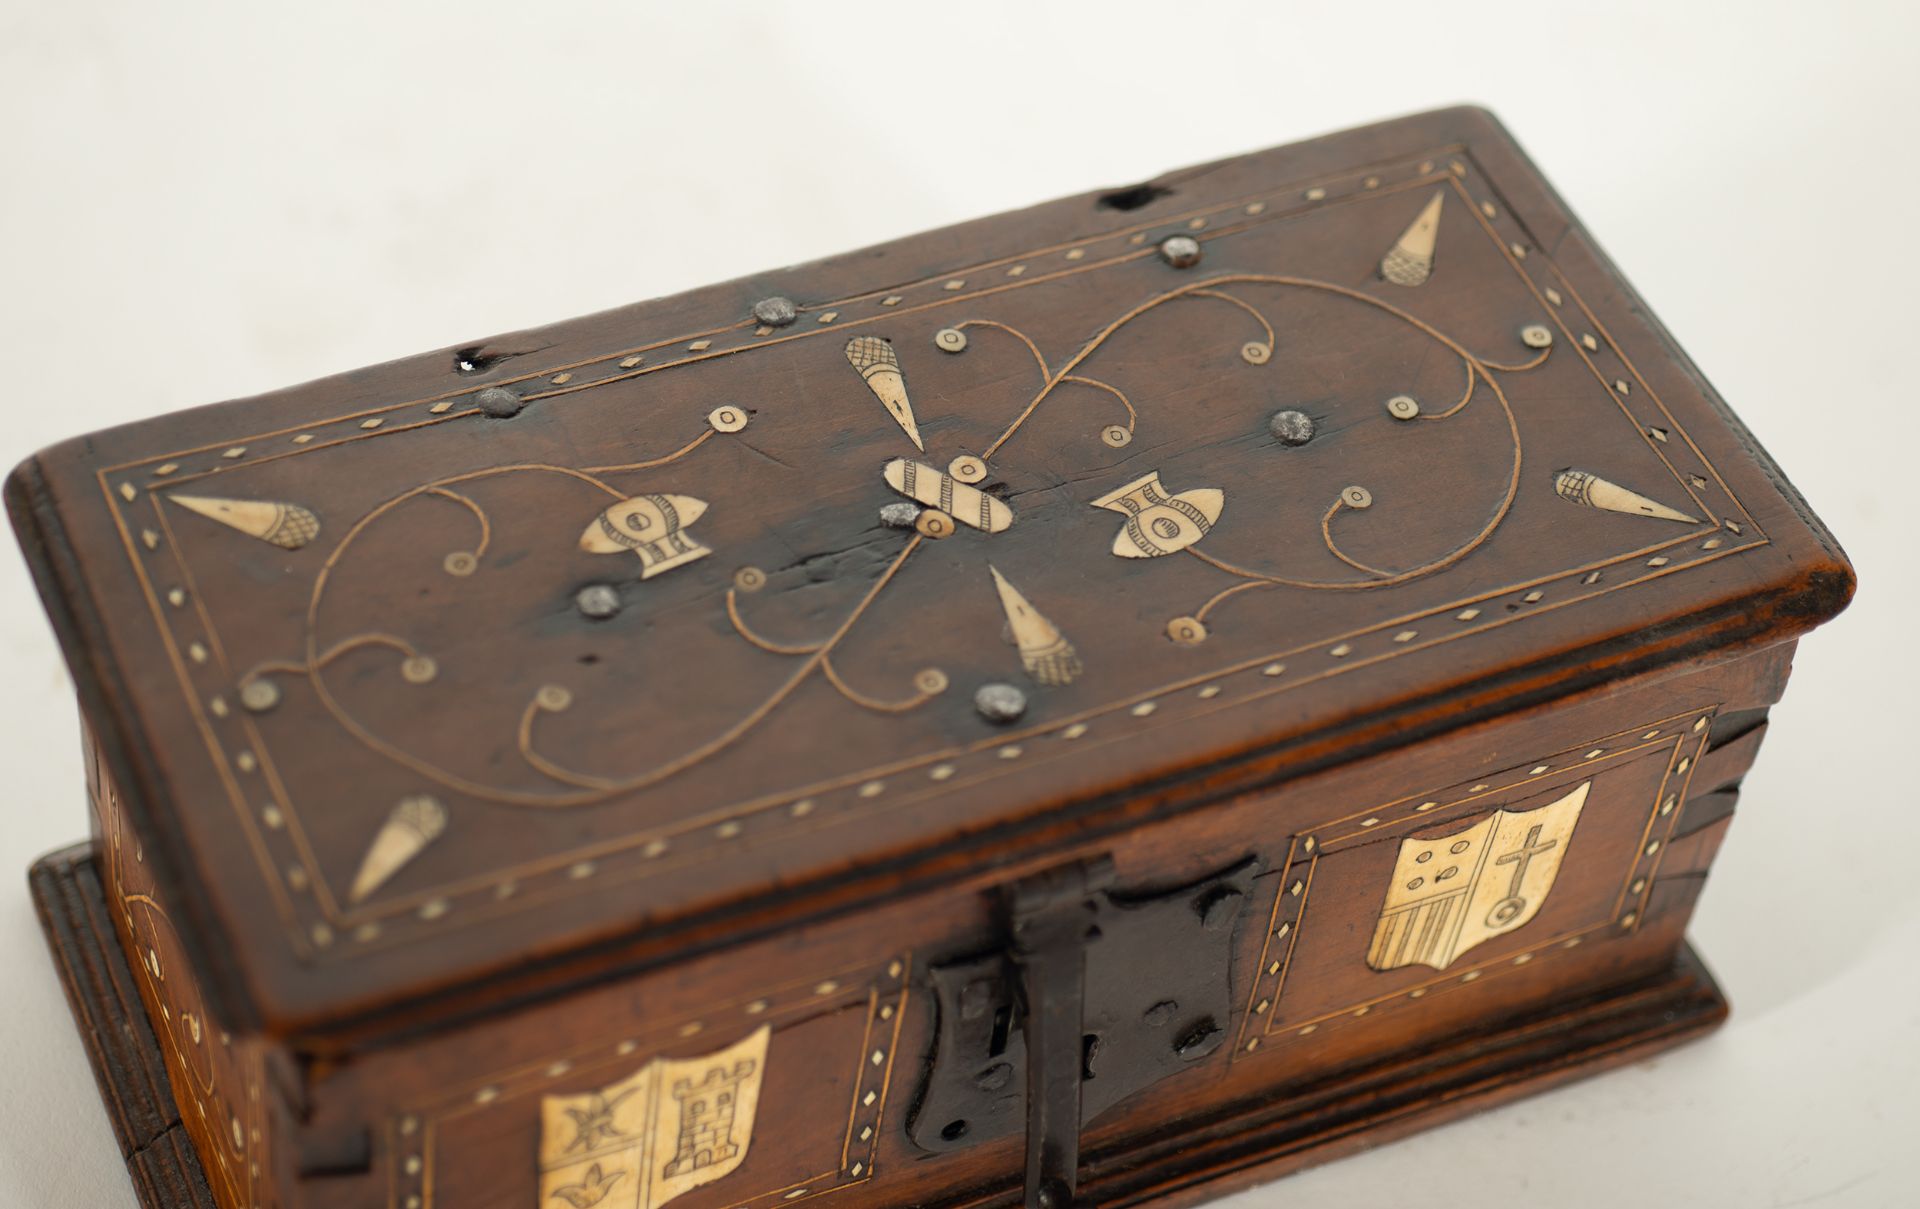 Plateresque style box in fruit wood and bone marquetry, Spanish school of the 19th - 20th centuries - Image 3 of 6